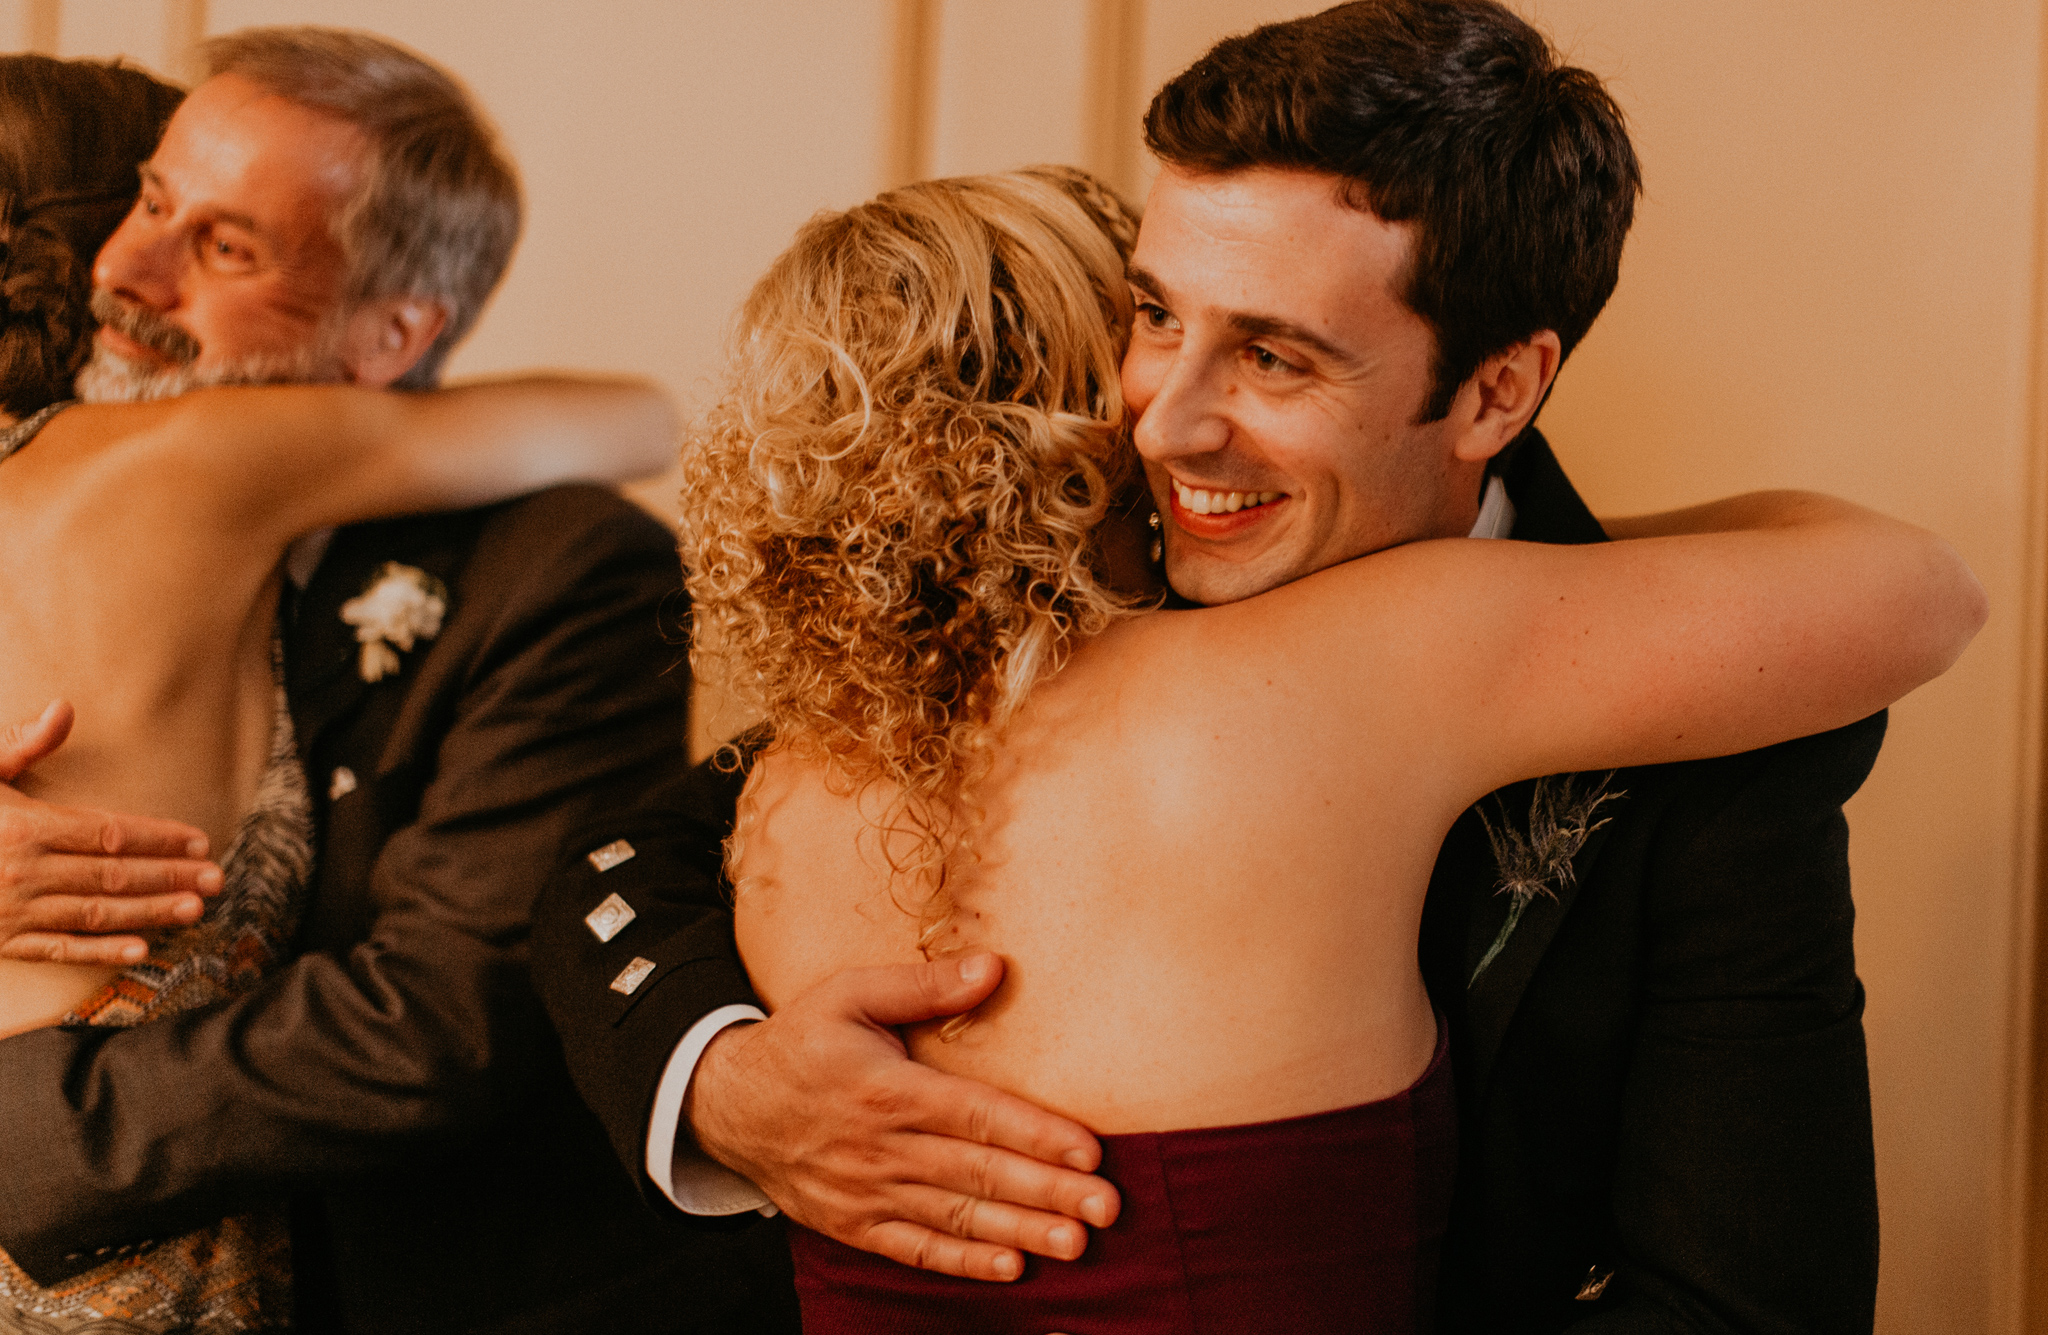 Groom hugs guest at wedding in candid photo